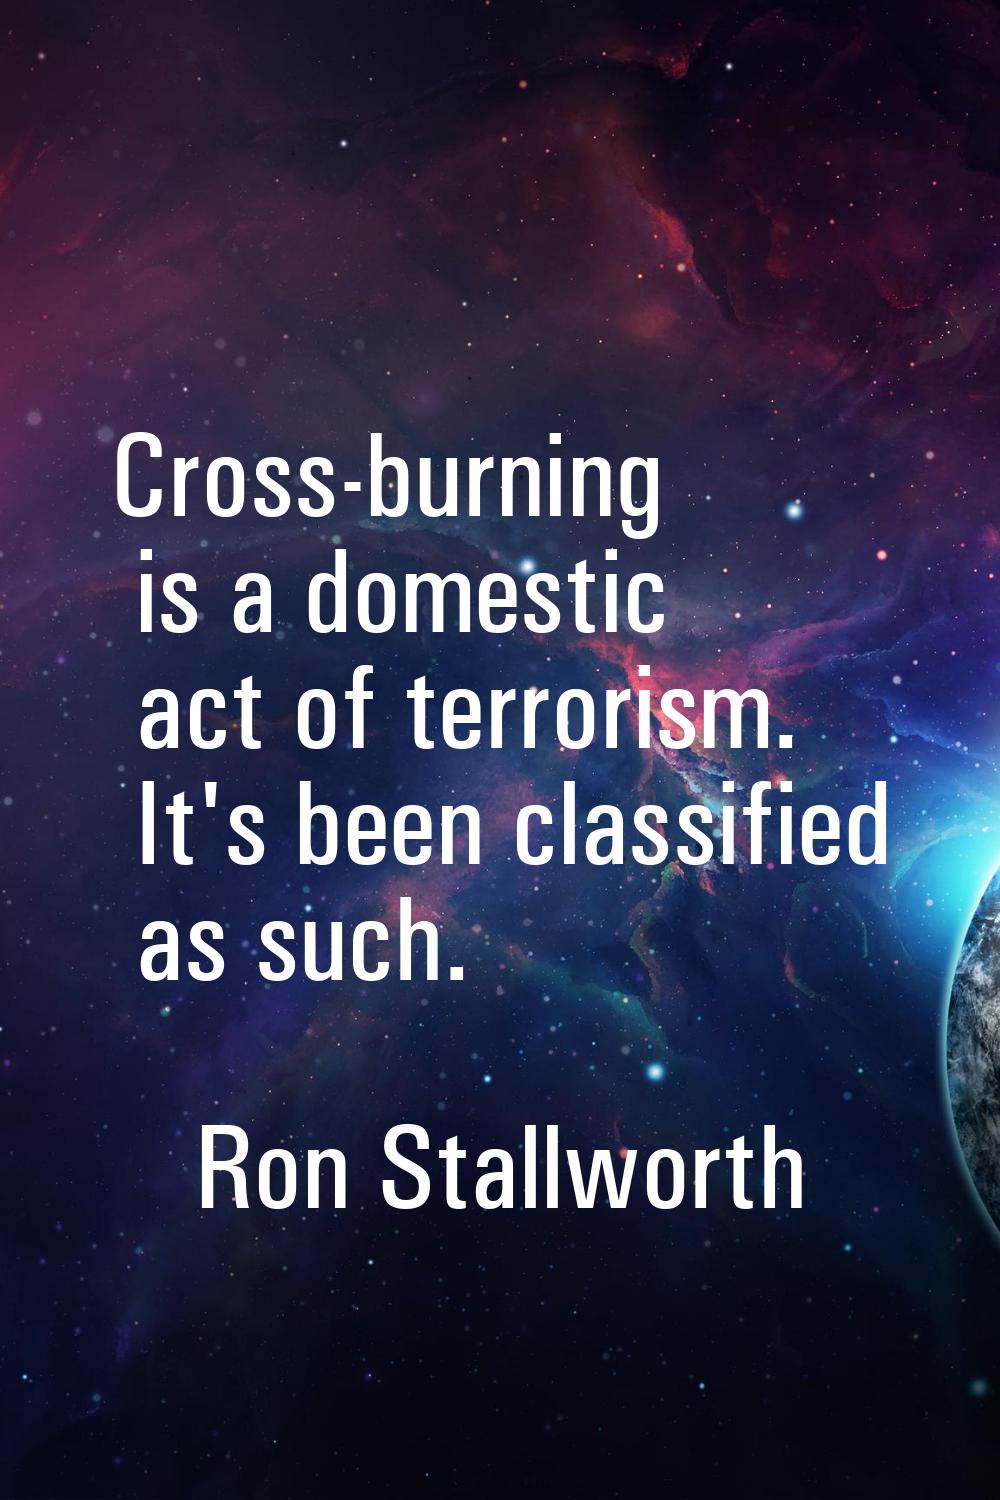 Cross-burning is a domestic act of terrorism. It's been classified as such.